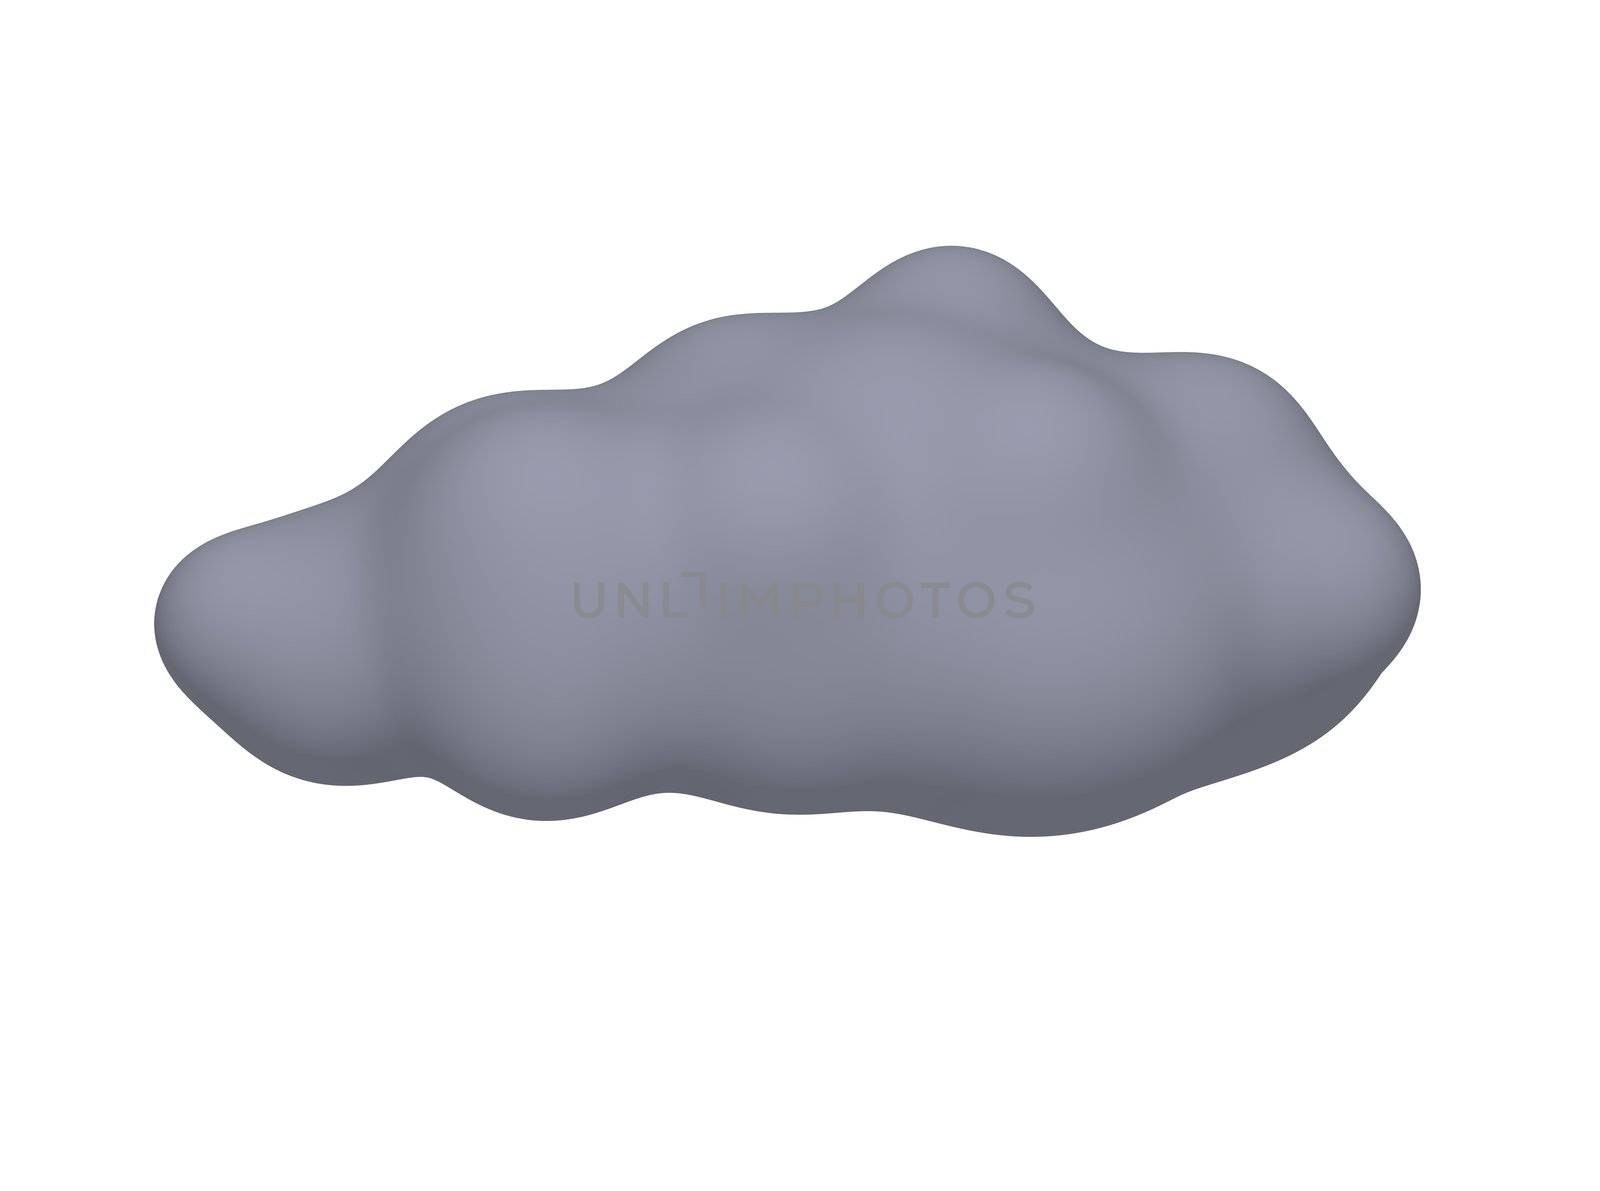 Dark storm cloud isolated on white. 3d rendered illustration.